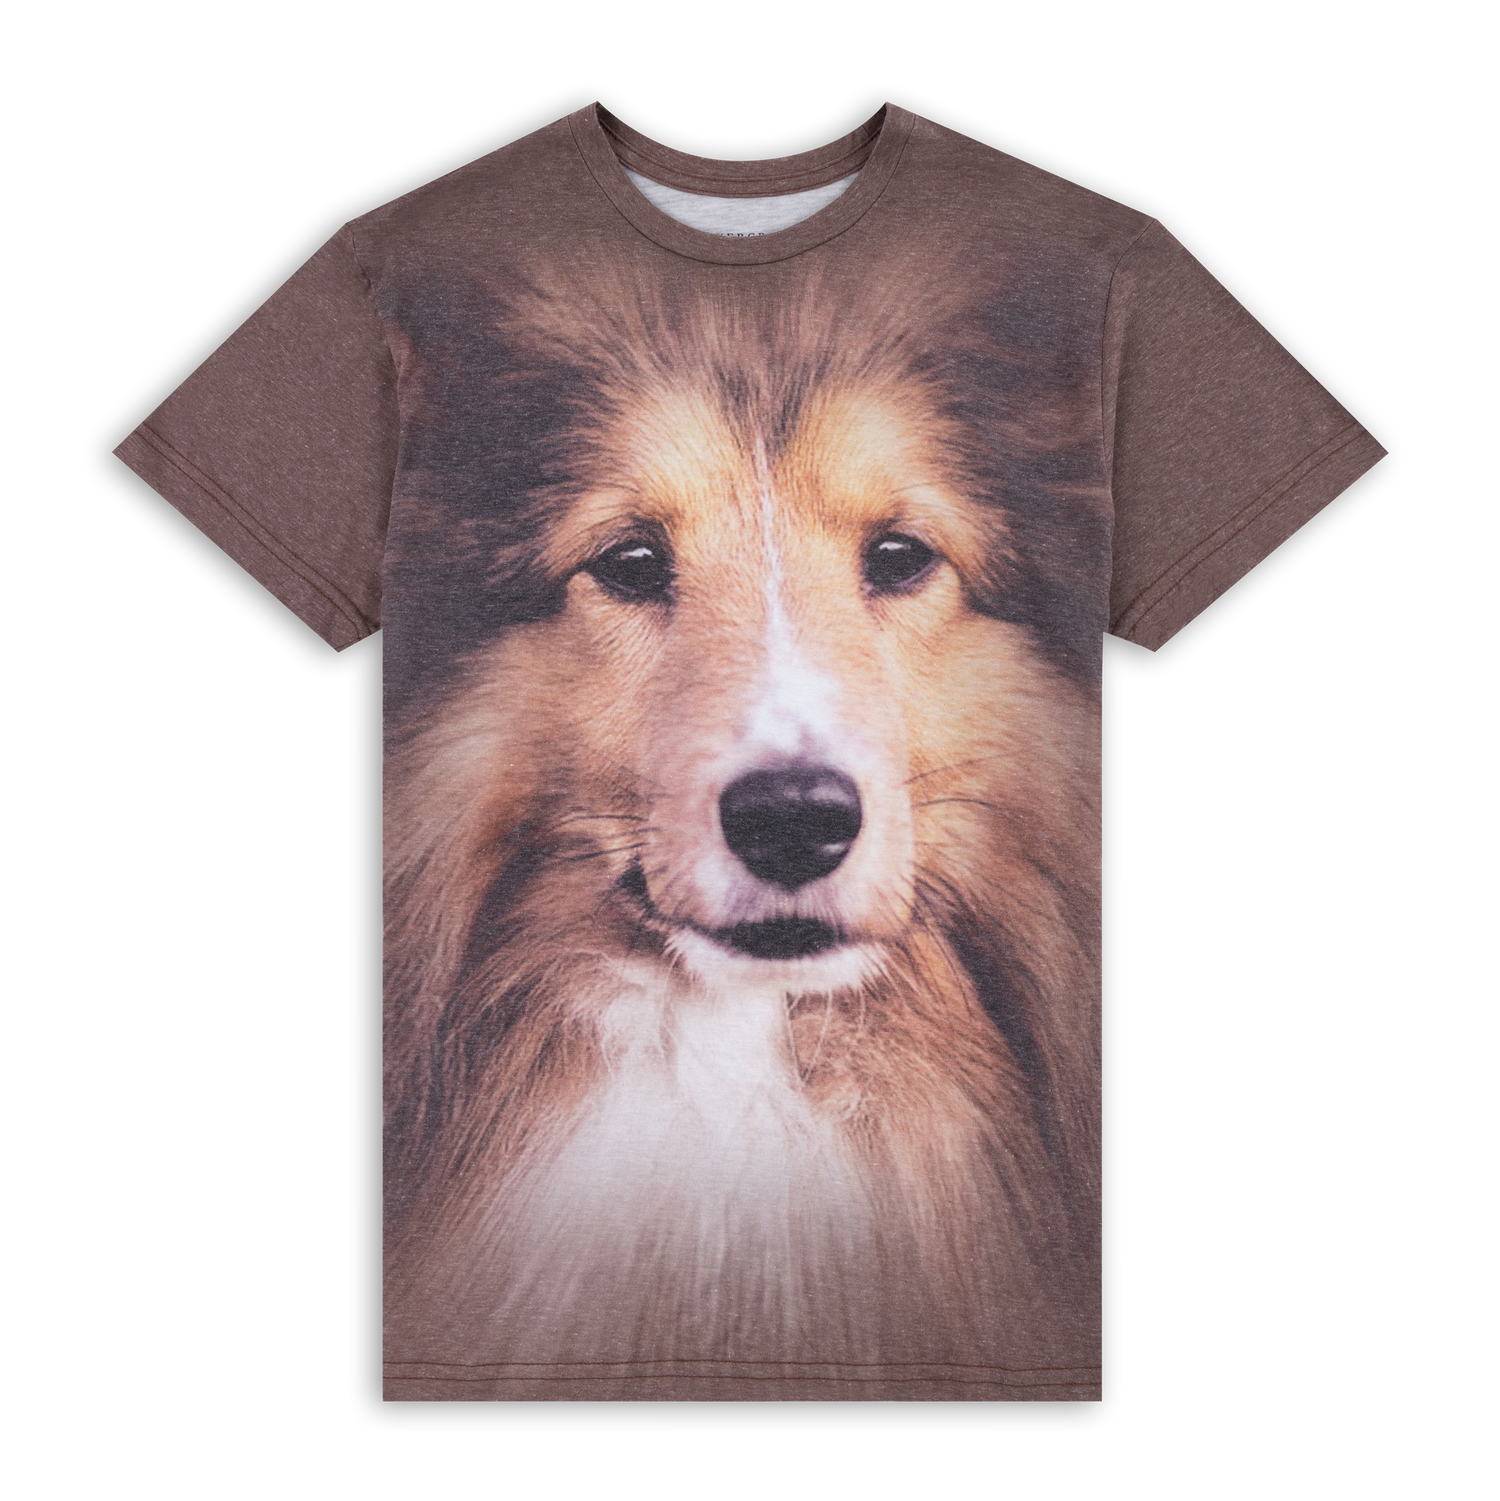 The Big Face Collie T-Shirt